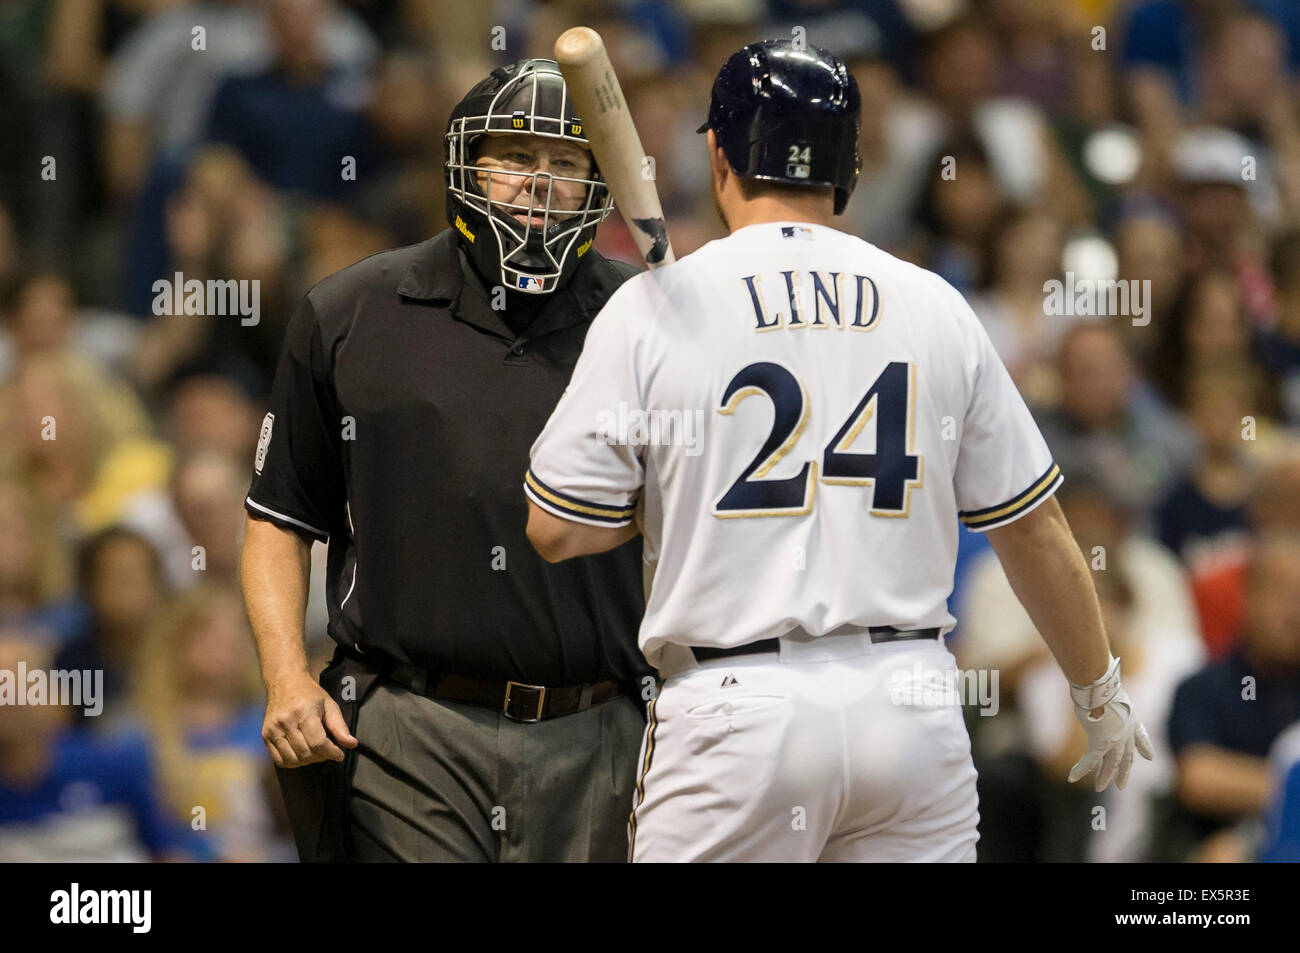 Milwaukee, WI, USA. 7th July, 2015. Milwaukee Brewers first baseman Adam Lind #24 discusses a third strike call with the home plate umpire during the Major League Baseball game between the Milwaukee Brewers and the Atlanta Braves at Miller Park in Milwaukee, WI. Atlanta defeated Brewers 5-3. John Fisher/CSM/Alamy Live News Stock Photo